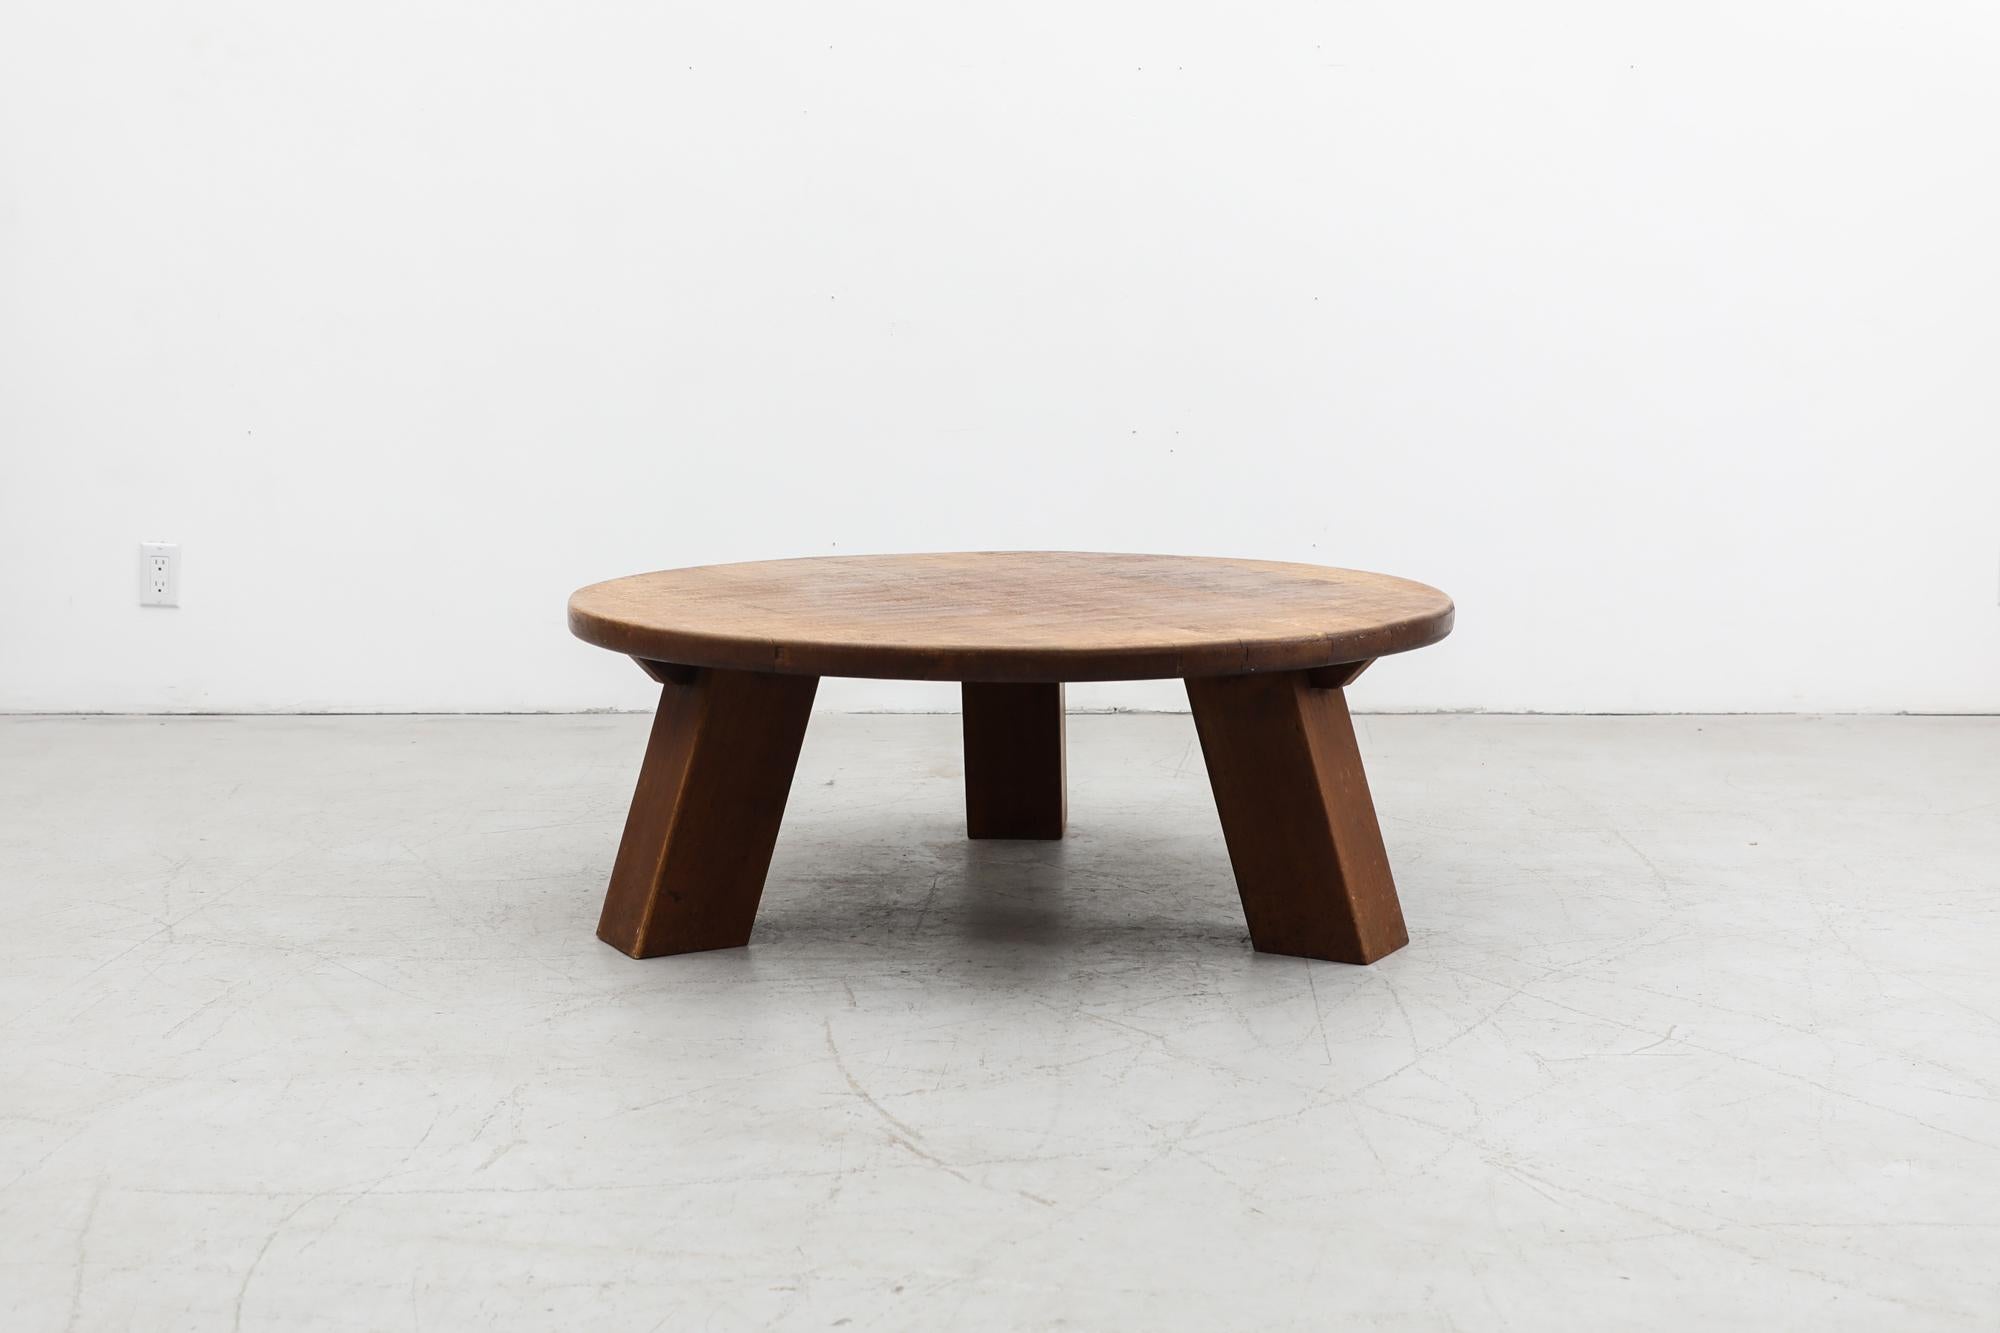 Heavy round Brutalist coffee table made from solid oak with three sturdy square legs. In very original condition with visible wear and patina consistent with its age and use. Other similar tables available and listed separately.